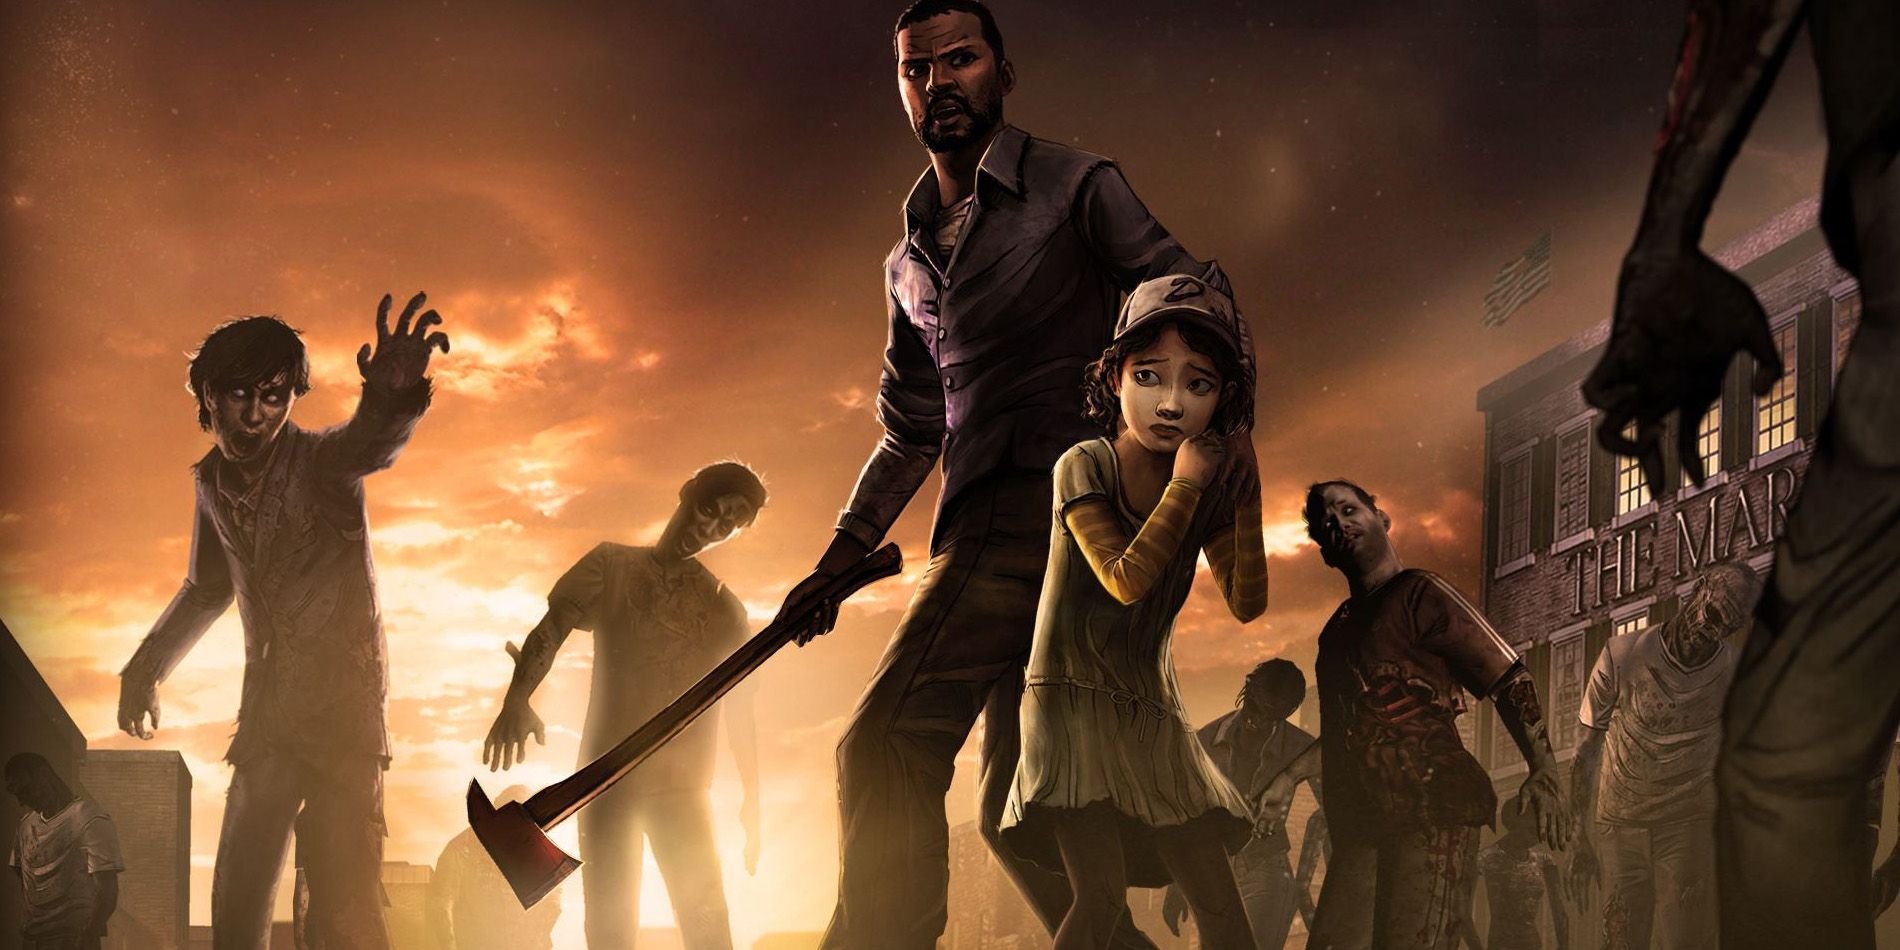 Lee and Clementine in the Walking Dead season 1.